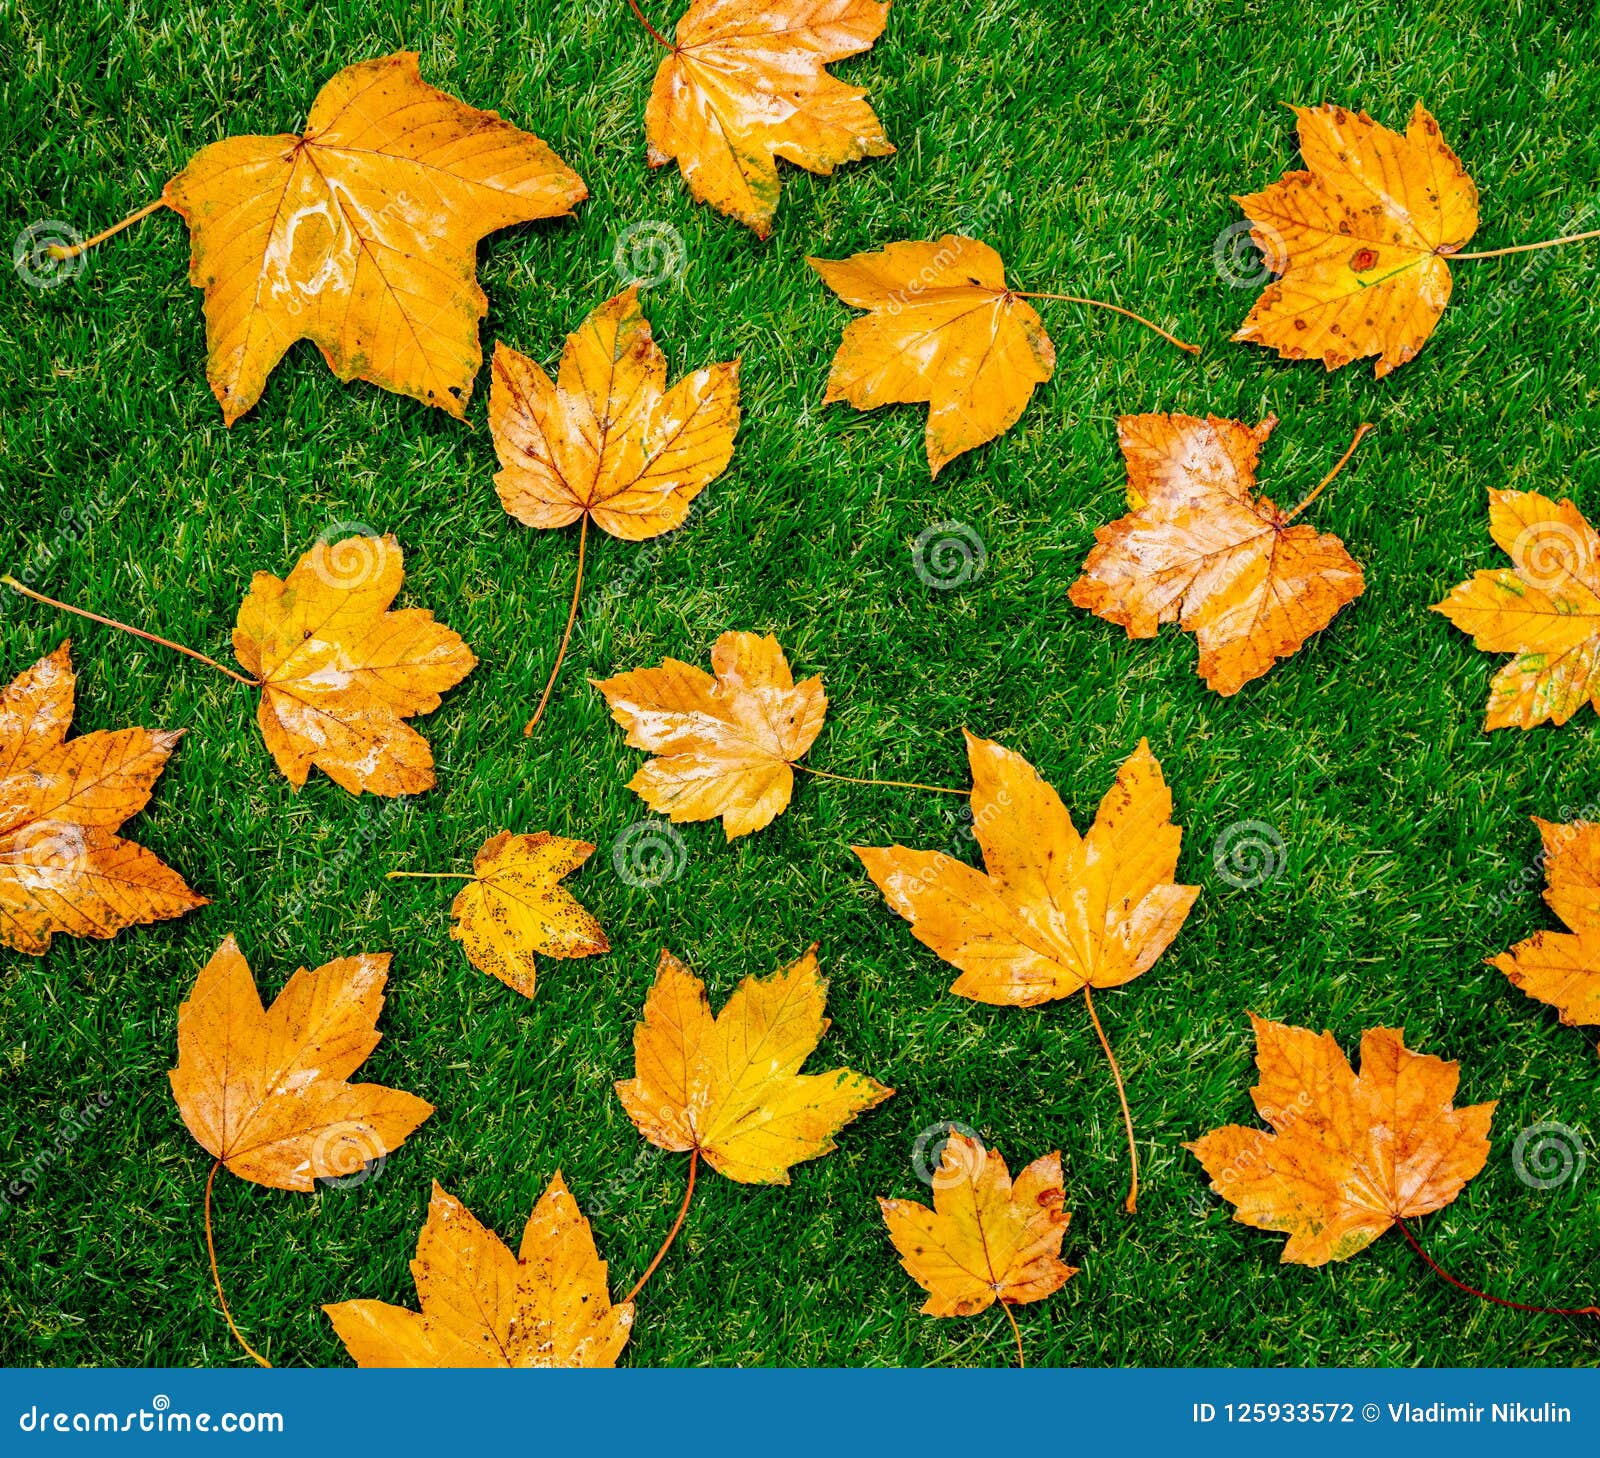 Golden Autumn Maple Leaves on Green Grass. Stock Photo - Image of